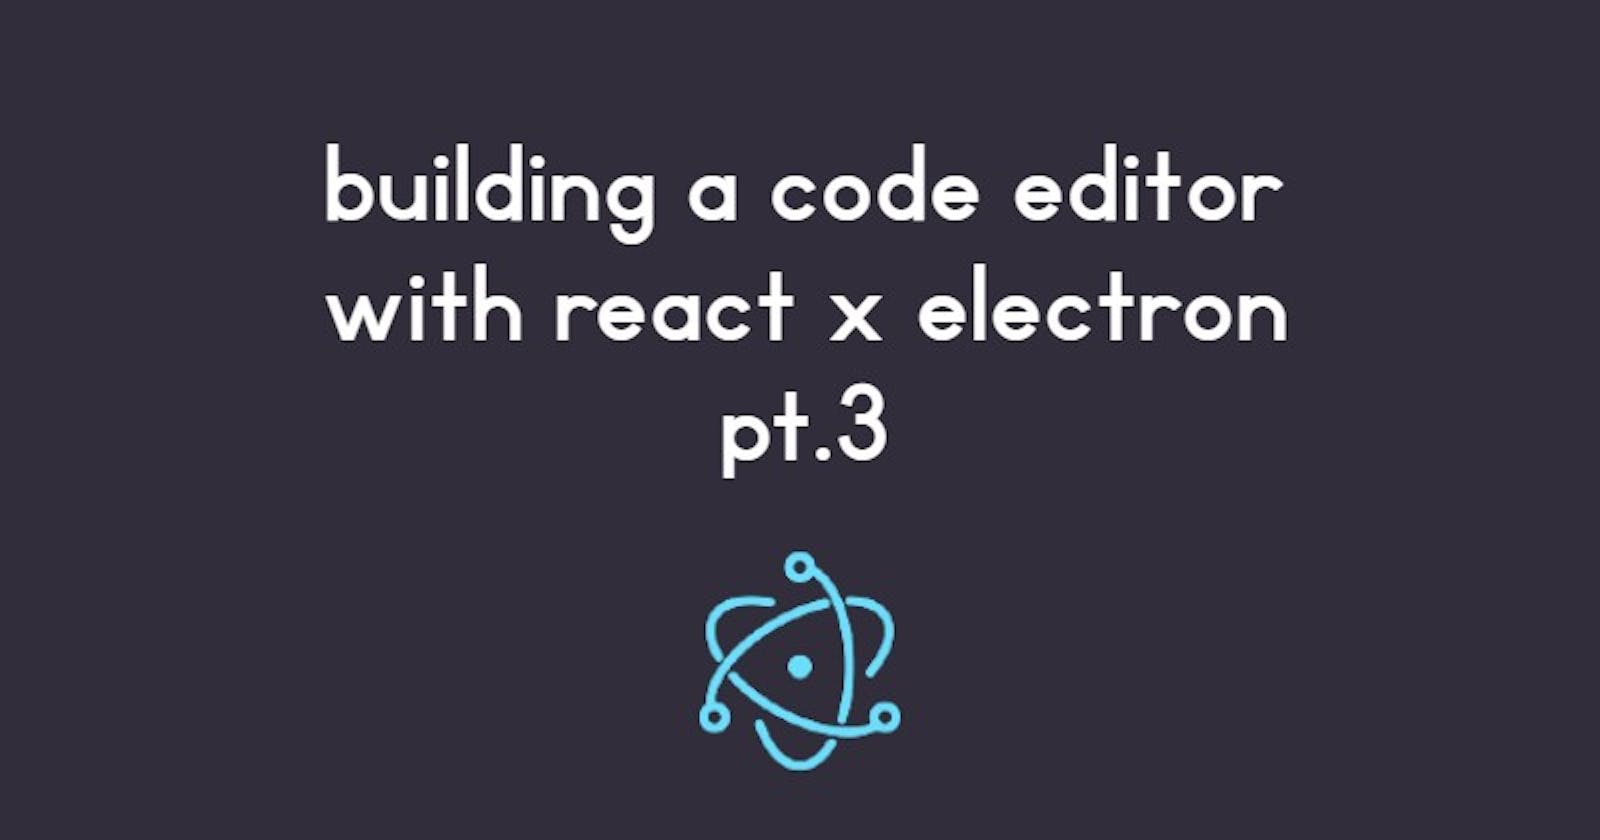 Building a react x electron code editor pt.3 - creating a basic lexer and visualising tokens